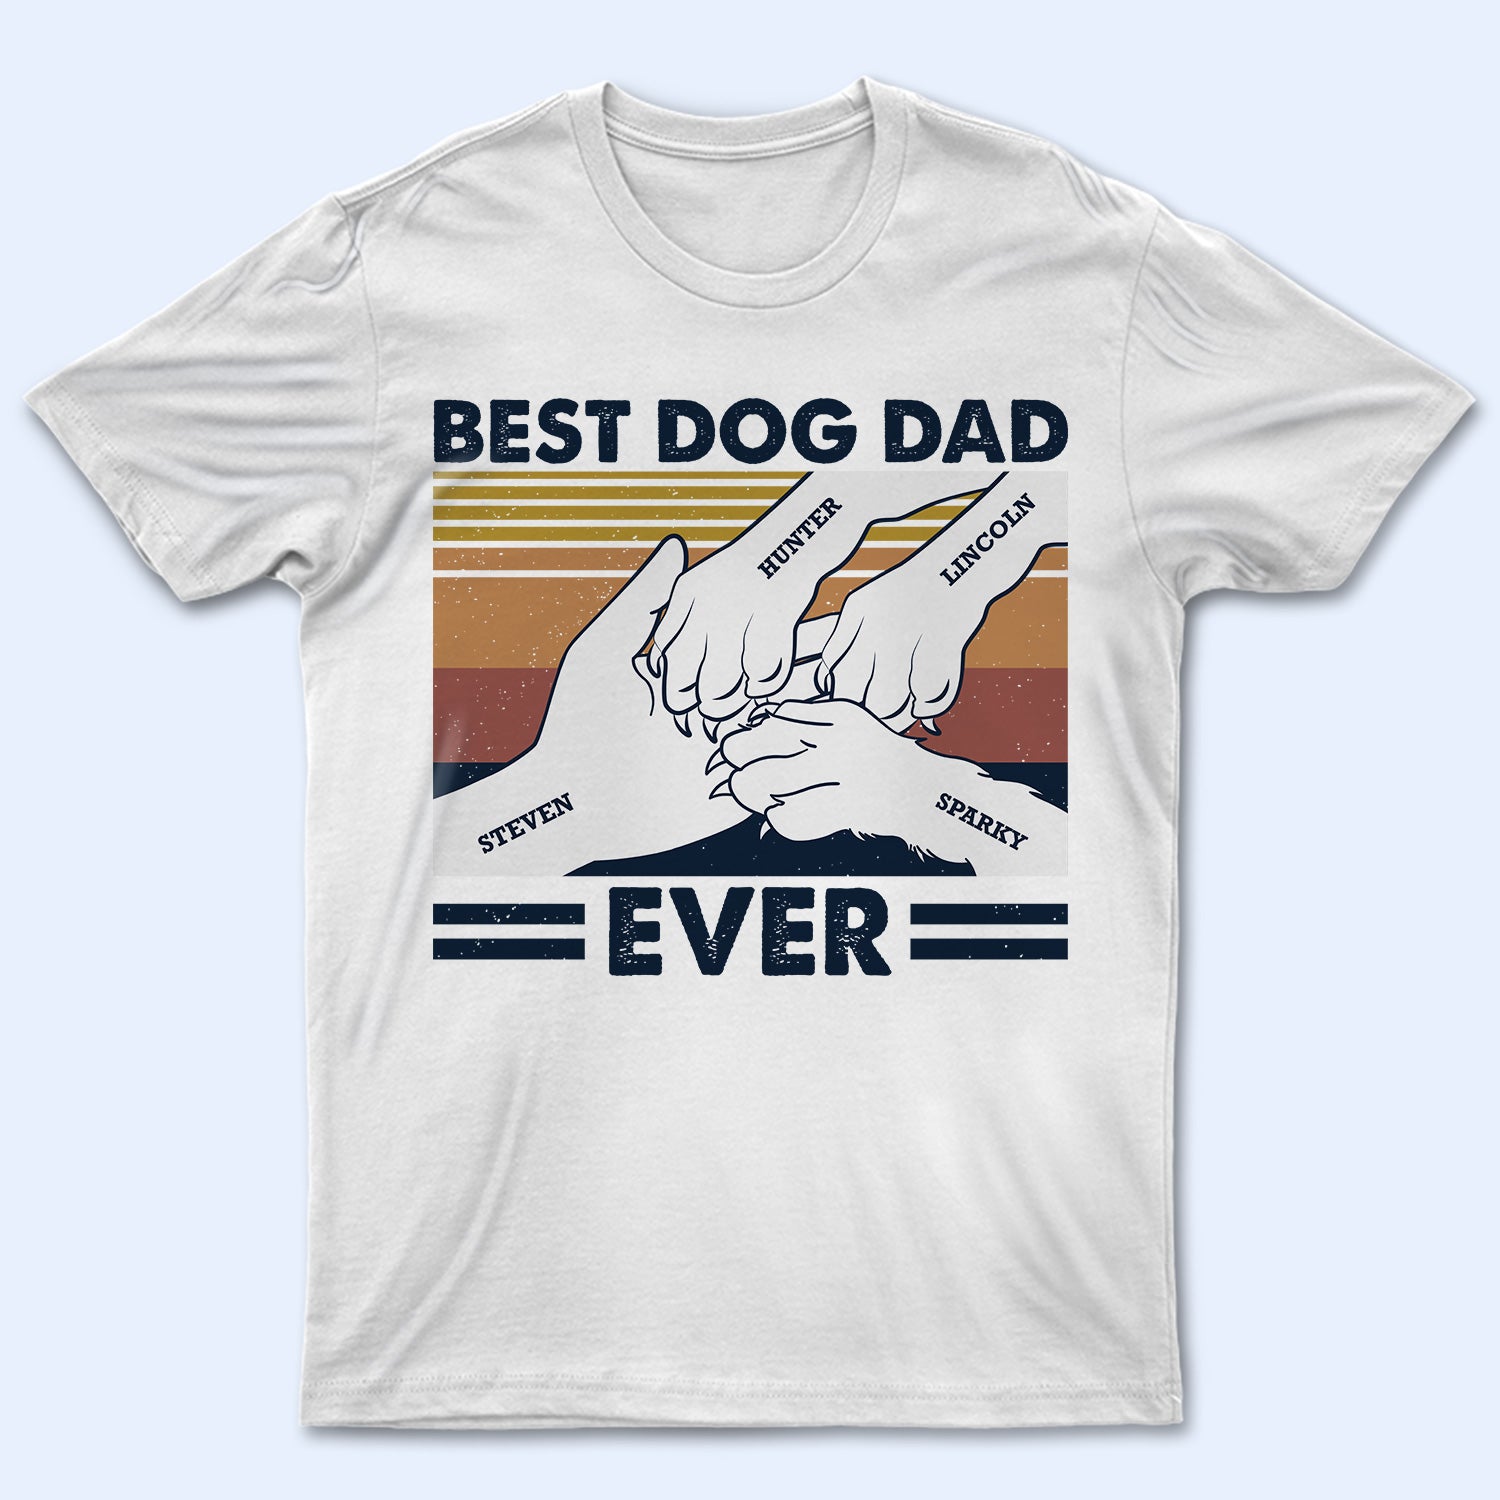 Best Dog Dad Ever, Cat Dad, Pet Lover, Fur Parents - Birthday, Loving Gift For Father, Grandfather, Gift For Man - Personalized Custom T Shirt